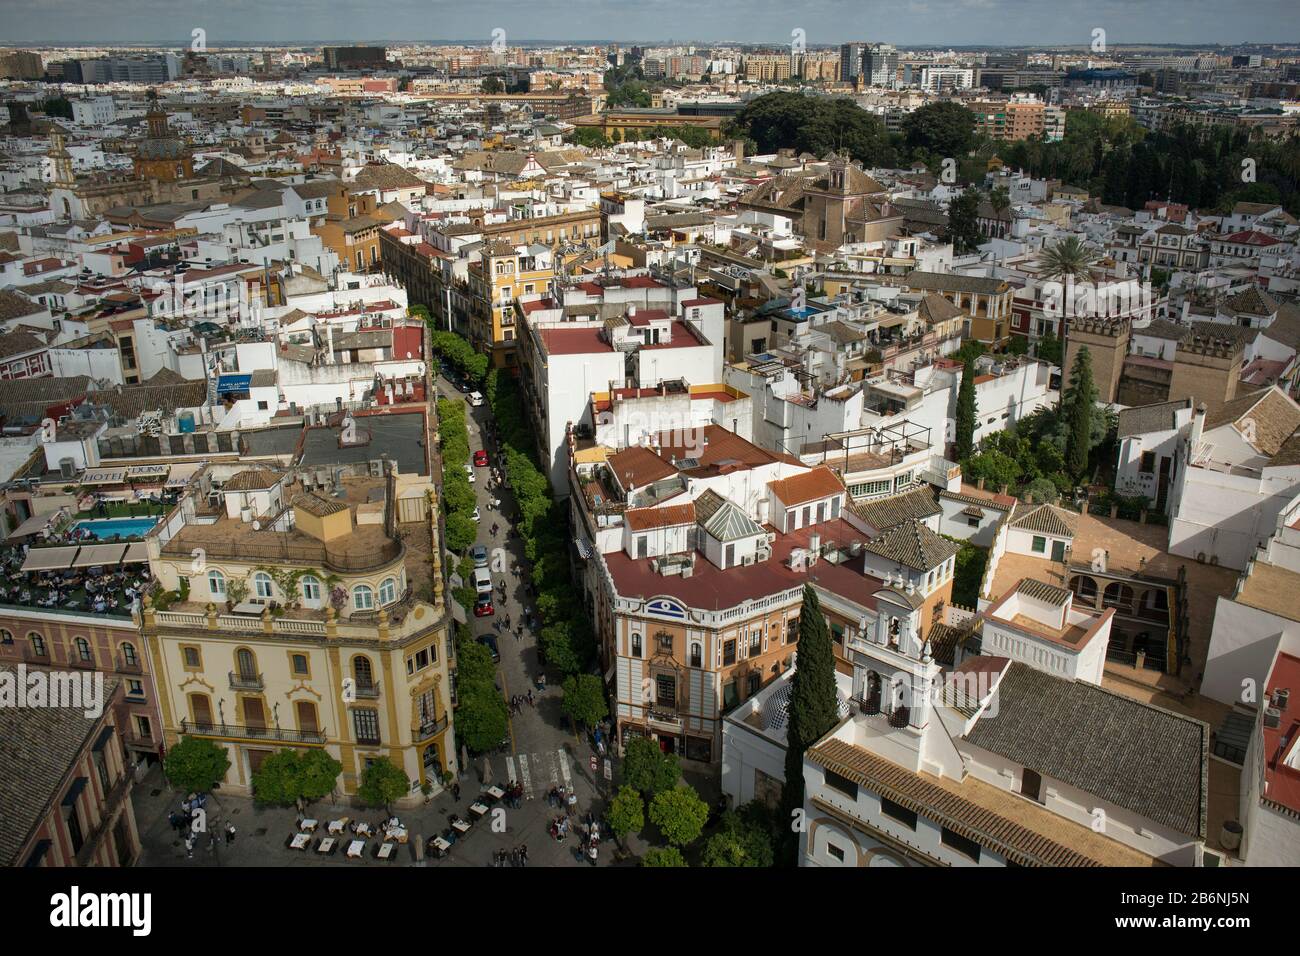 Panoramic aerial view of Seville from the Giralda tower, Spain Stock Photo